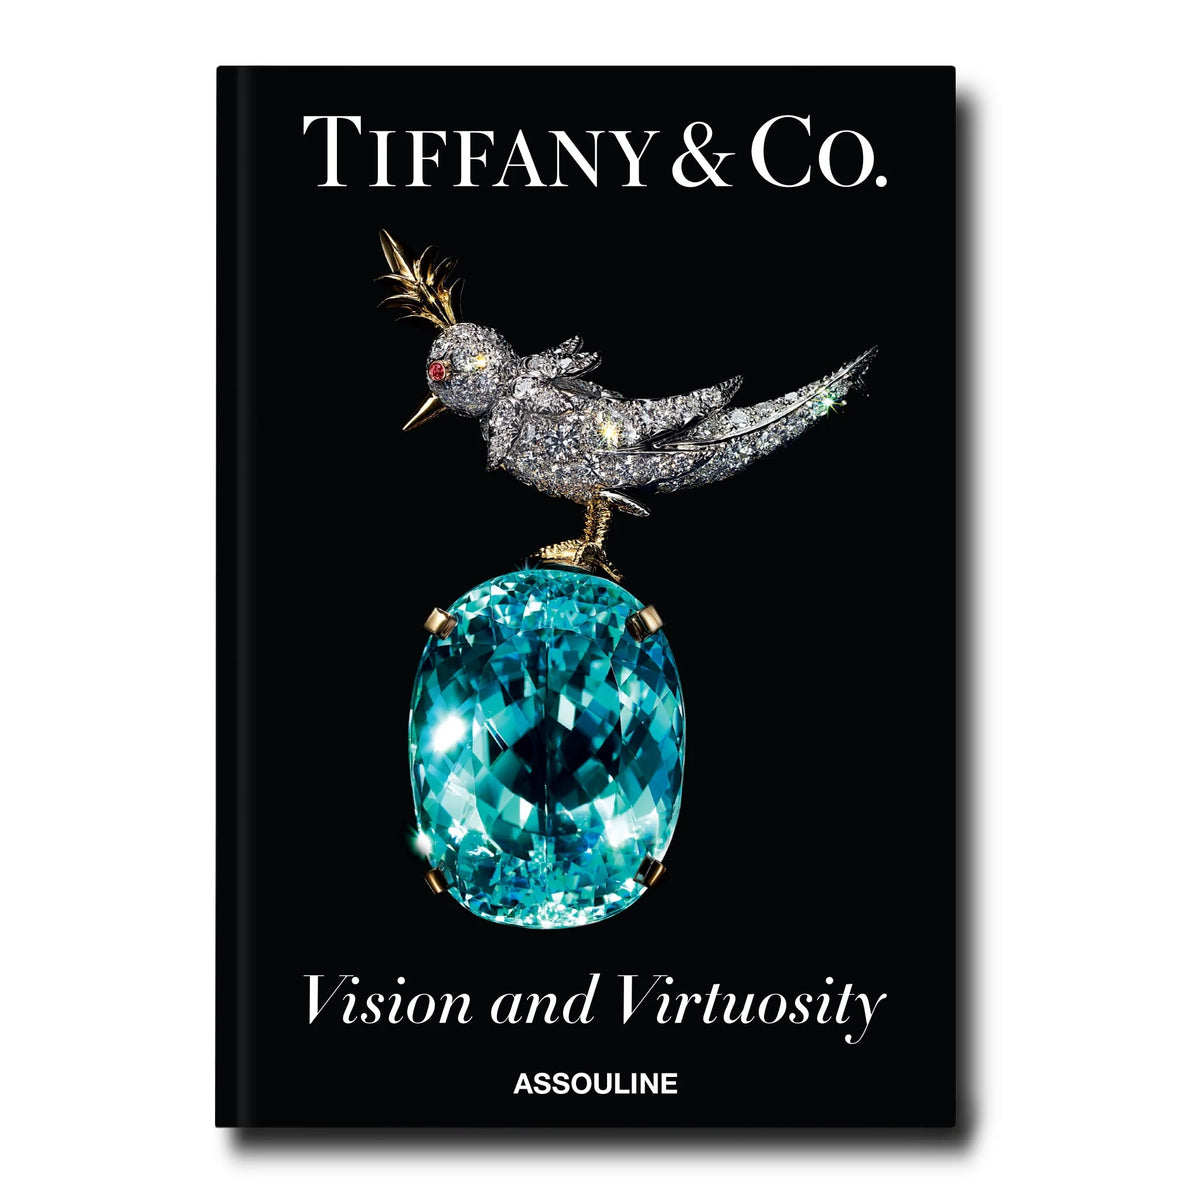 Tiffany and Co. Vision and Virtuosity book